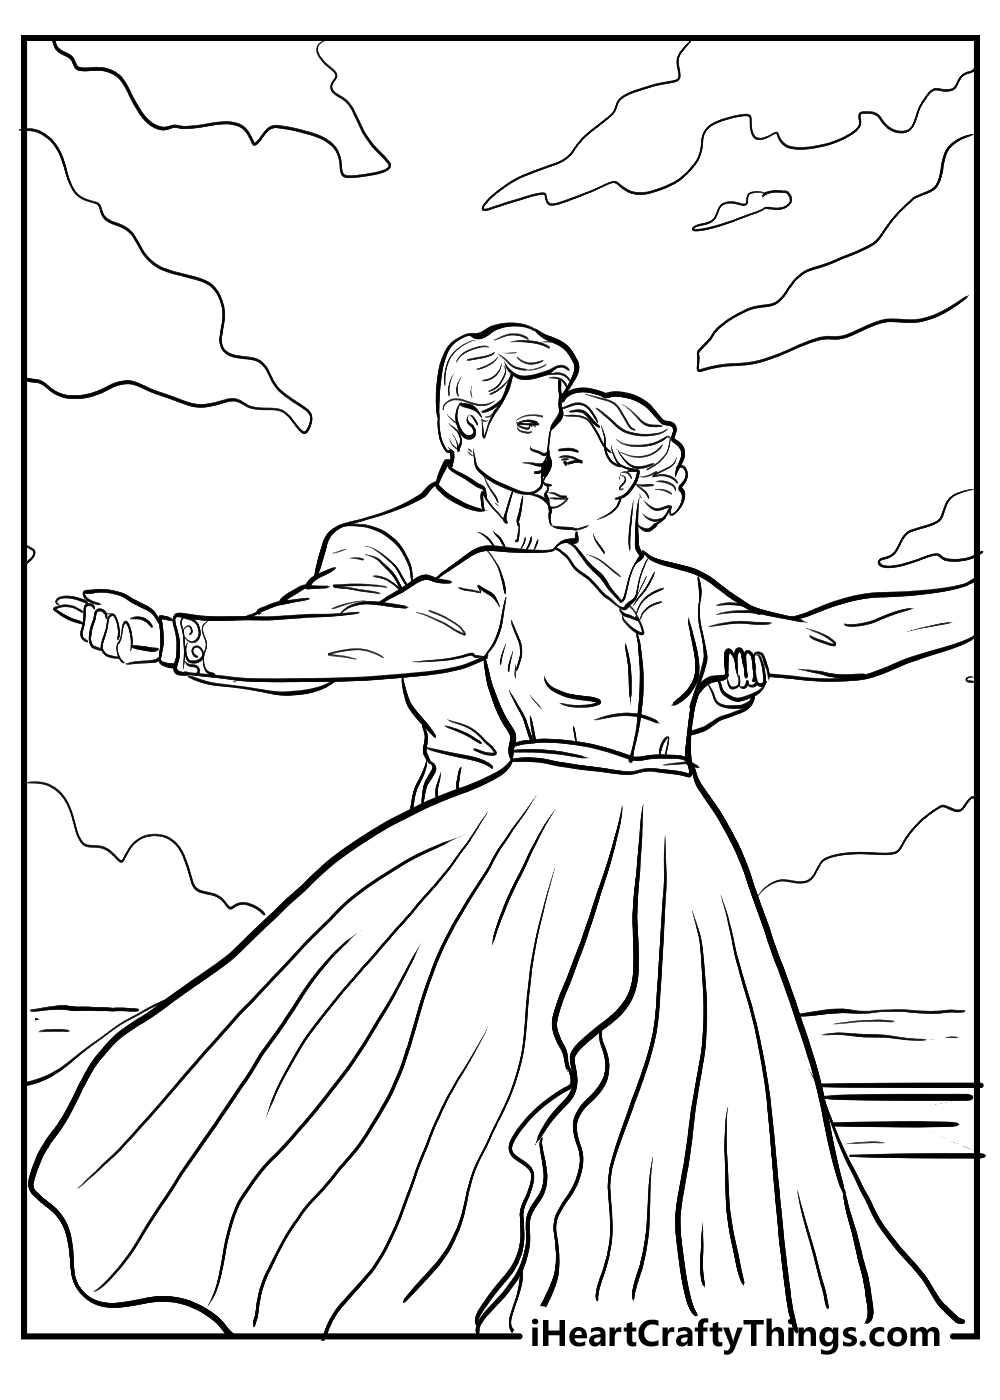 Jack and Rose titanic coloring printable for adults